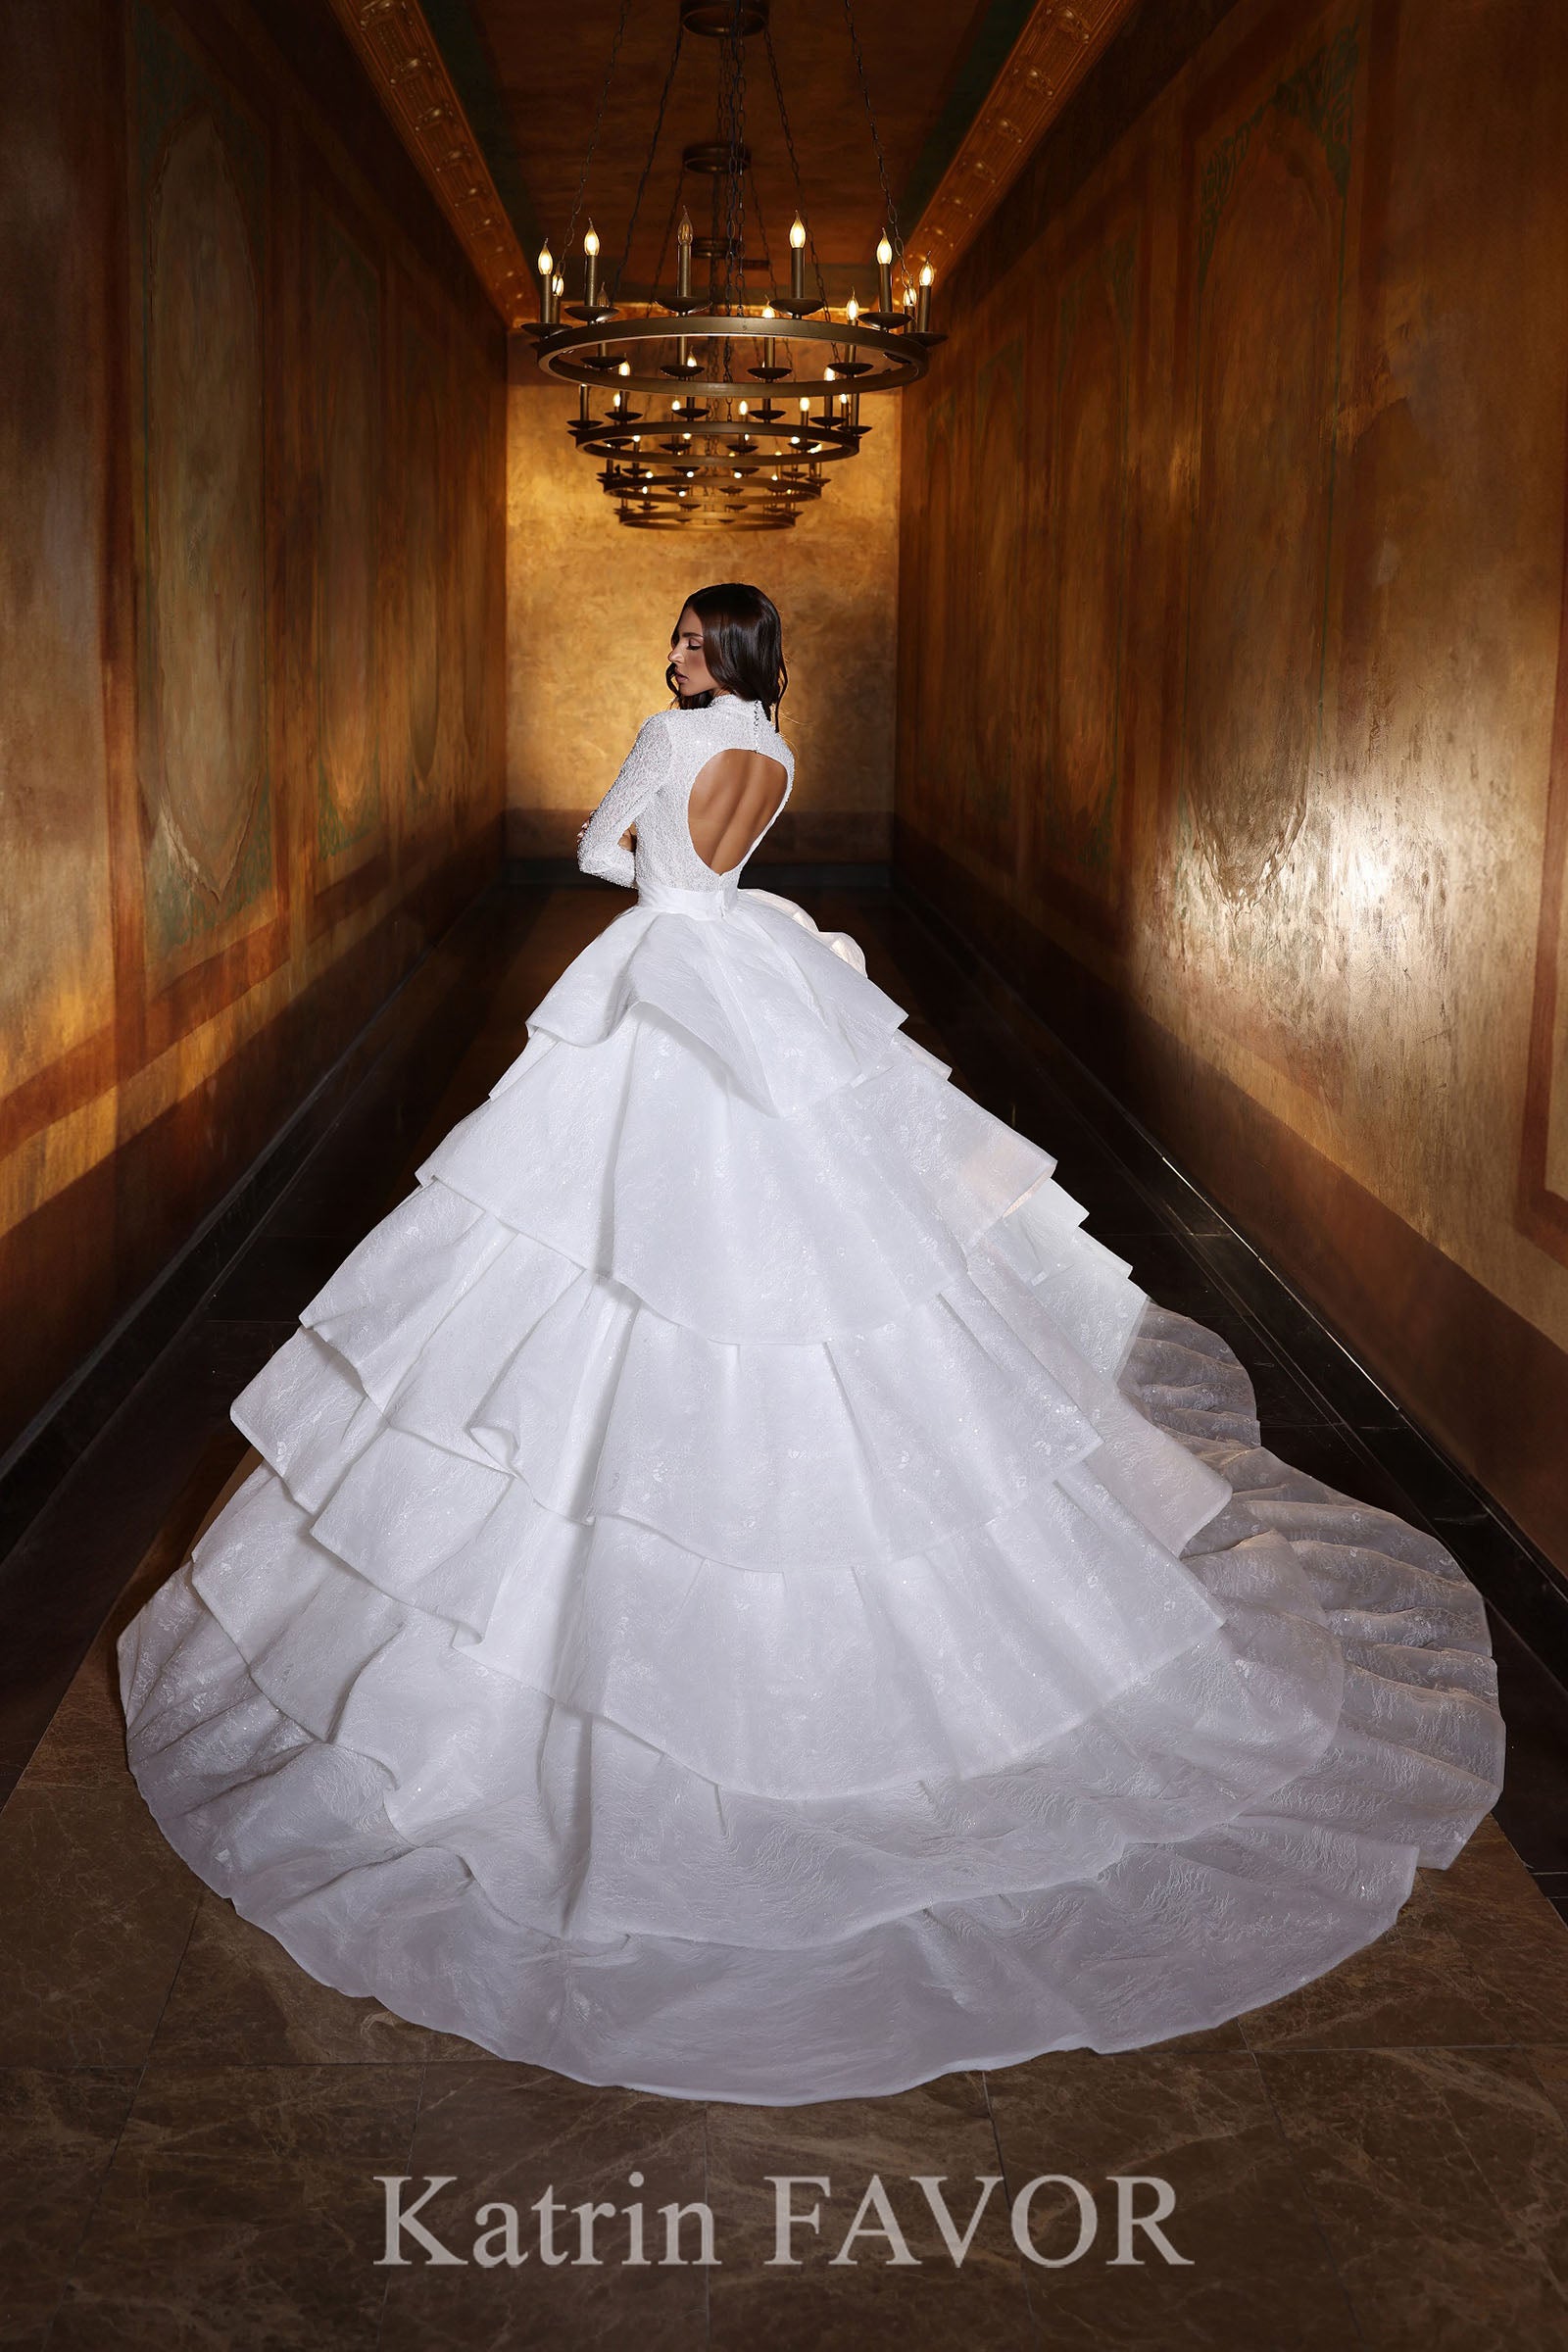 KatrinFAVORboutique-Ballgown silhouette high neck wedding dress with long sleeves